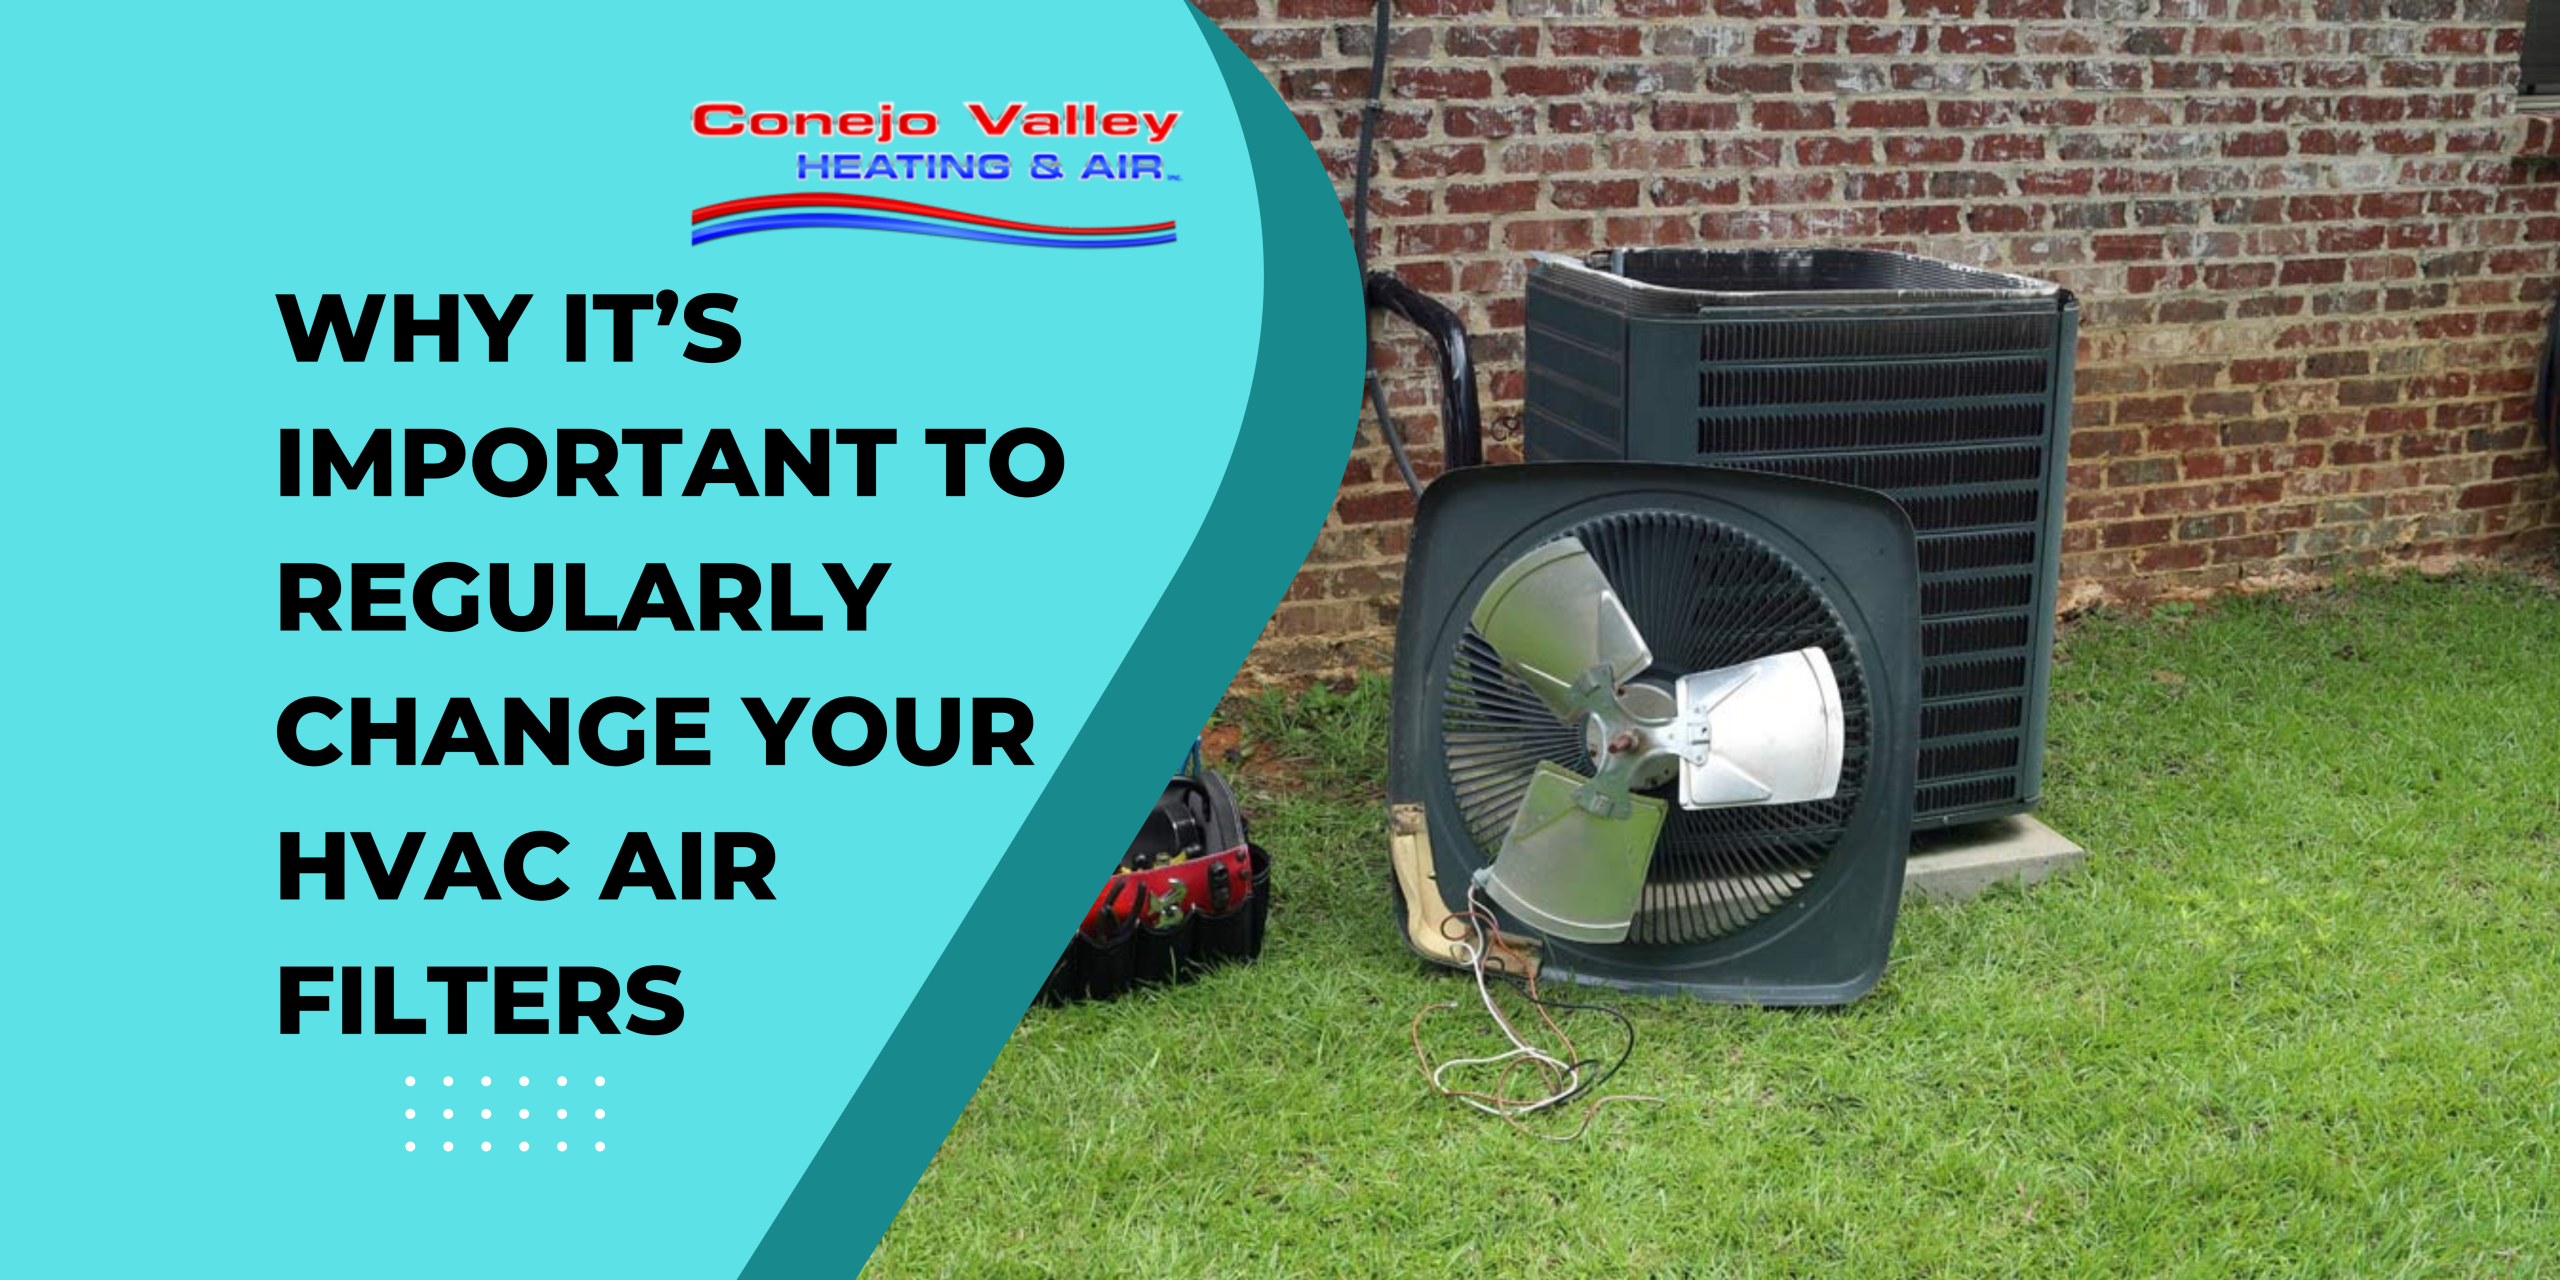 Why it’s Important to Regularly Change Your HVAC Air Filters